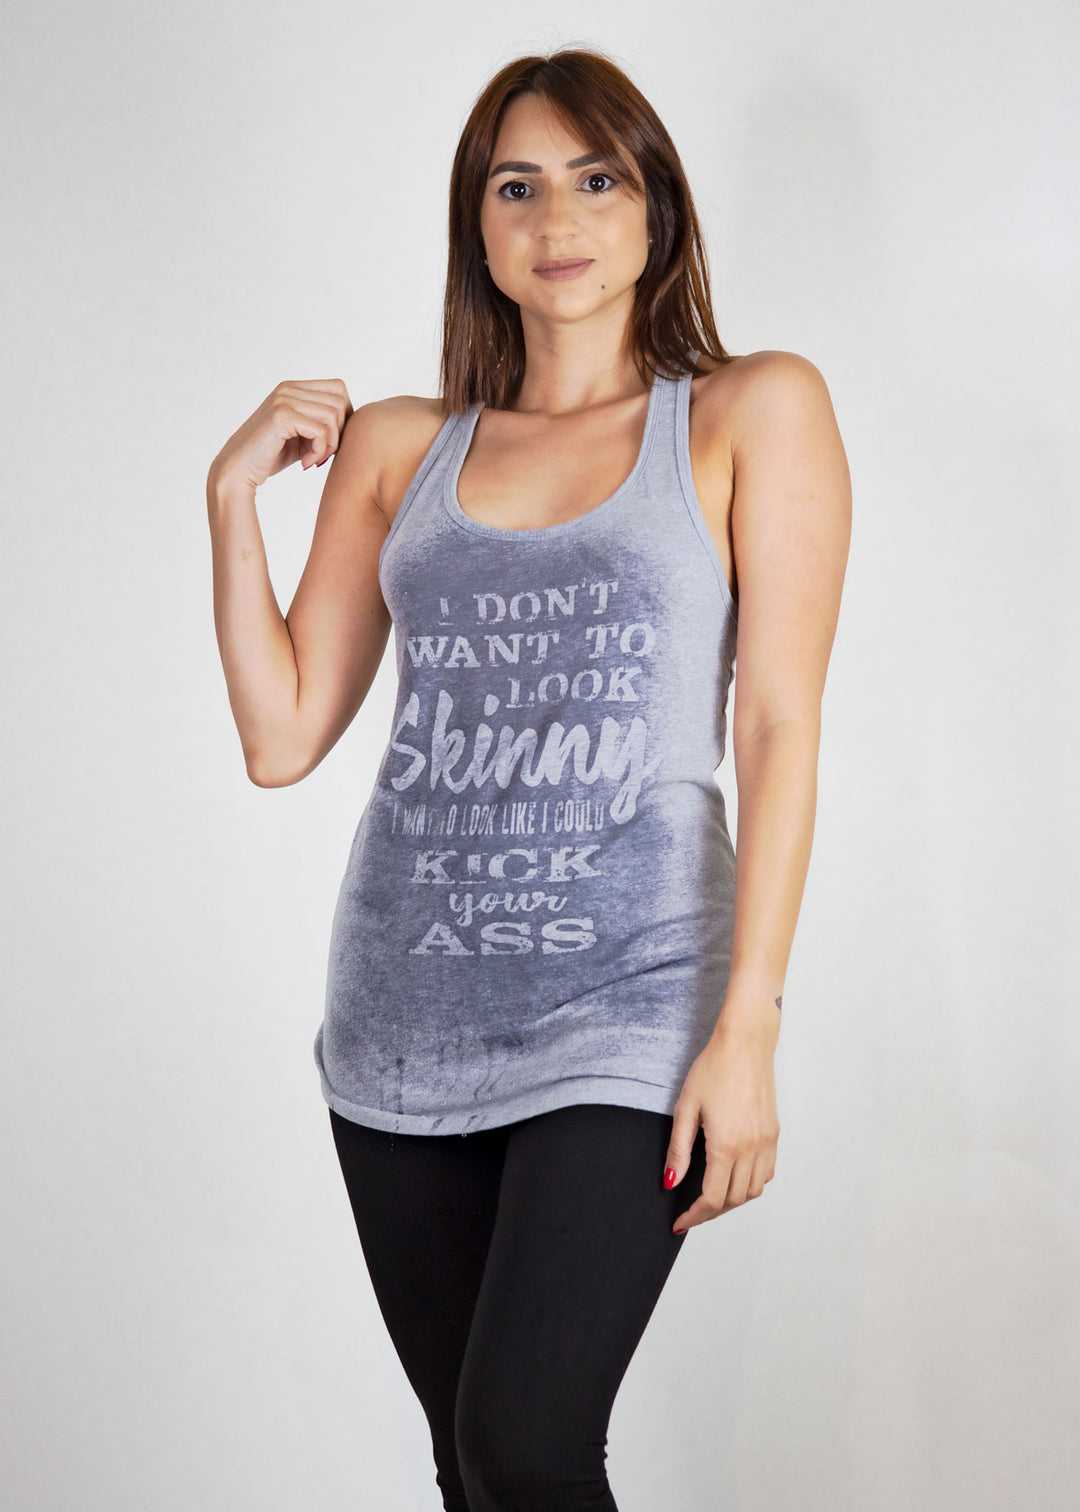 Funny Workout Shirts, Funny Workout Tanks, Leggings -Ministry of Sweat